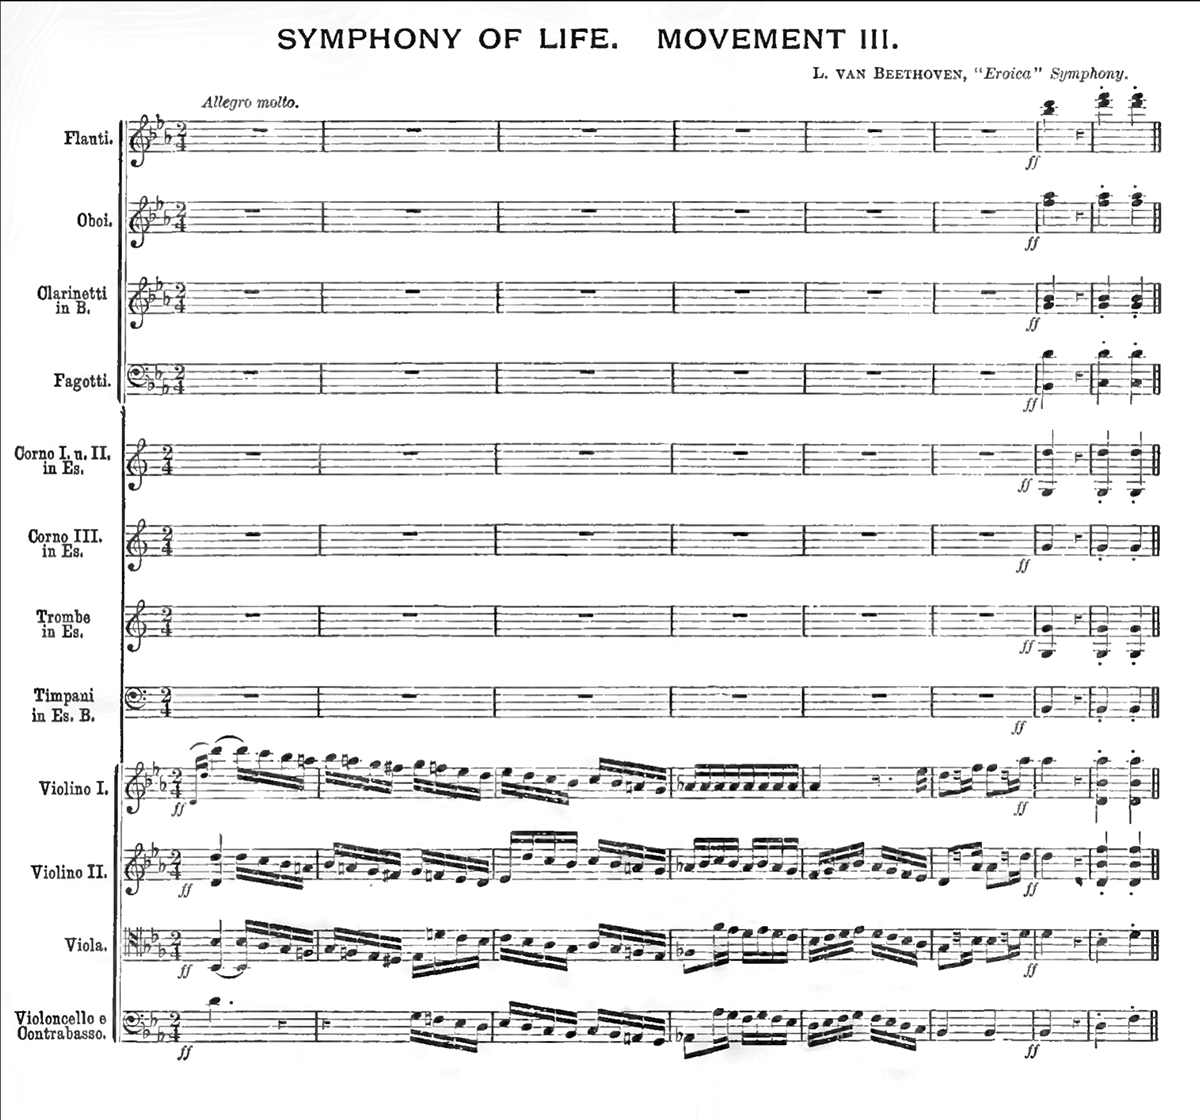 {Symphony of Life, Movement 1. The first page of the score of the third movement, Allegro molto, of Beethoven}